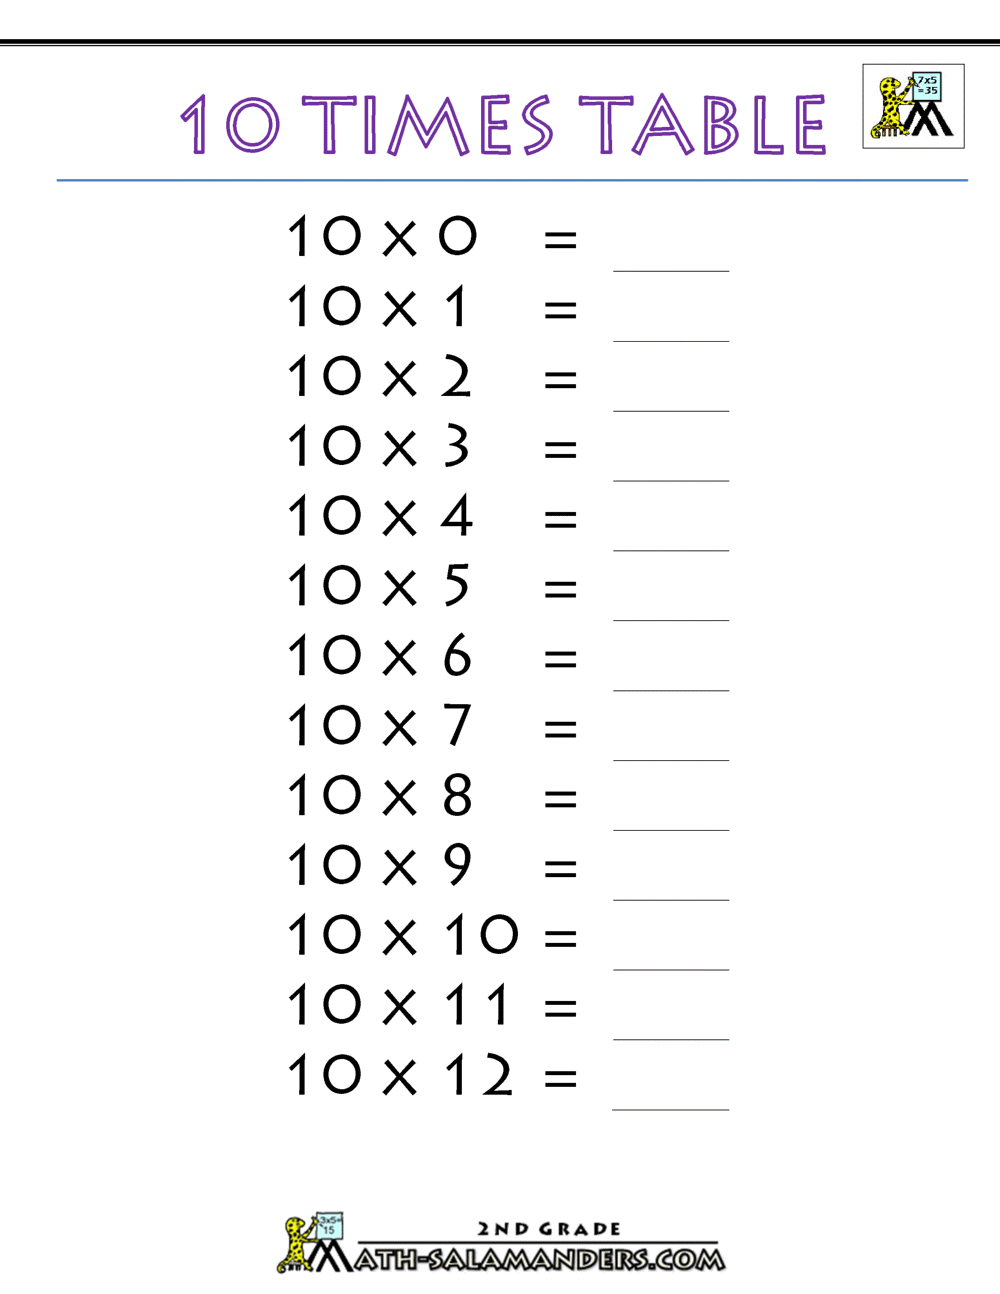 The Multiplication Chart Up To 12